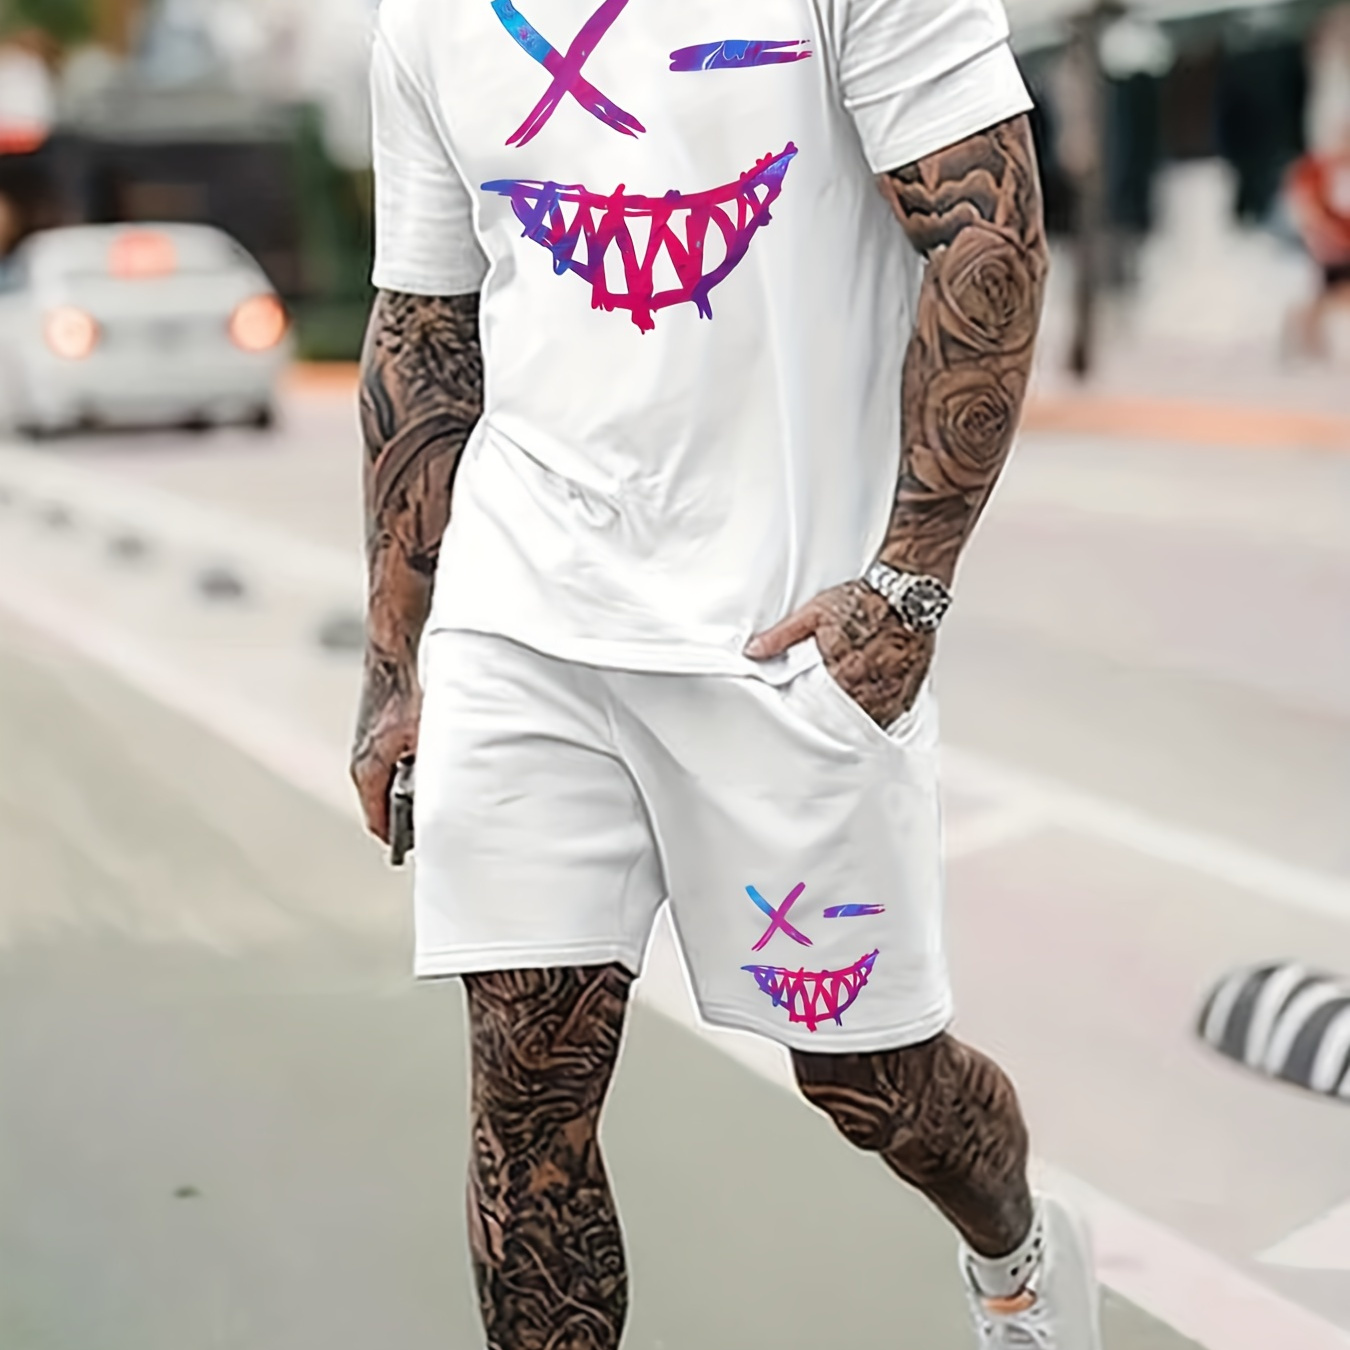 

Monster Face Print, Men's 2pcs Outfits, Casual Crew Neck Short Sleeve T-shirt And Drawstring Shorts Set For Summer, Men's Clothing For Daily Vacation Resorts